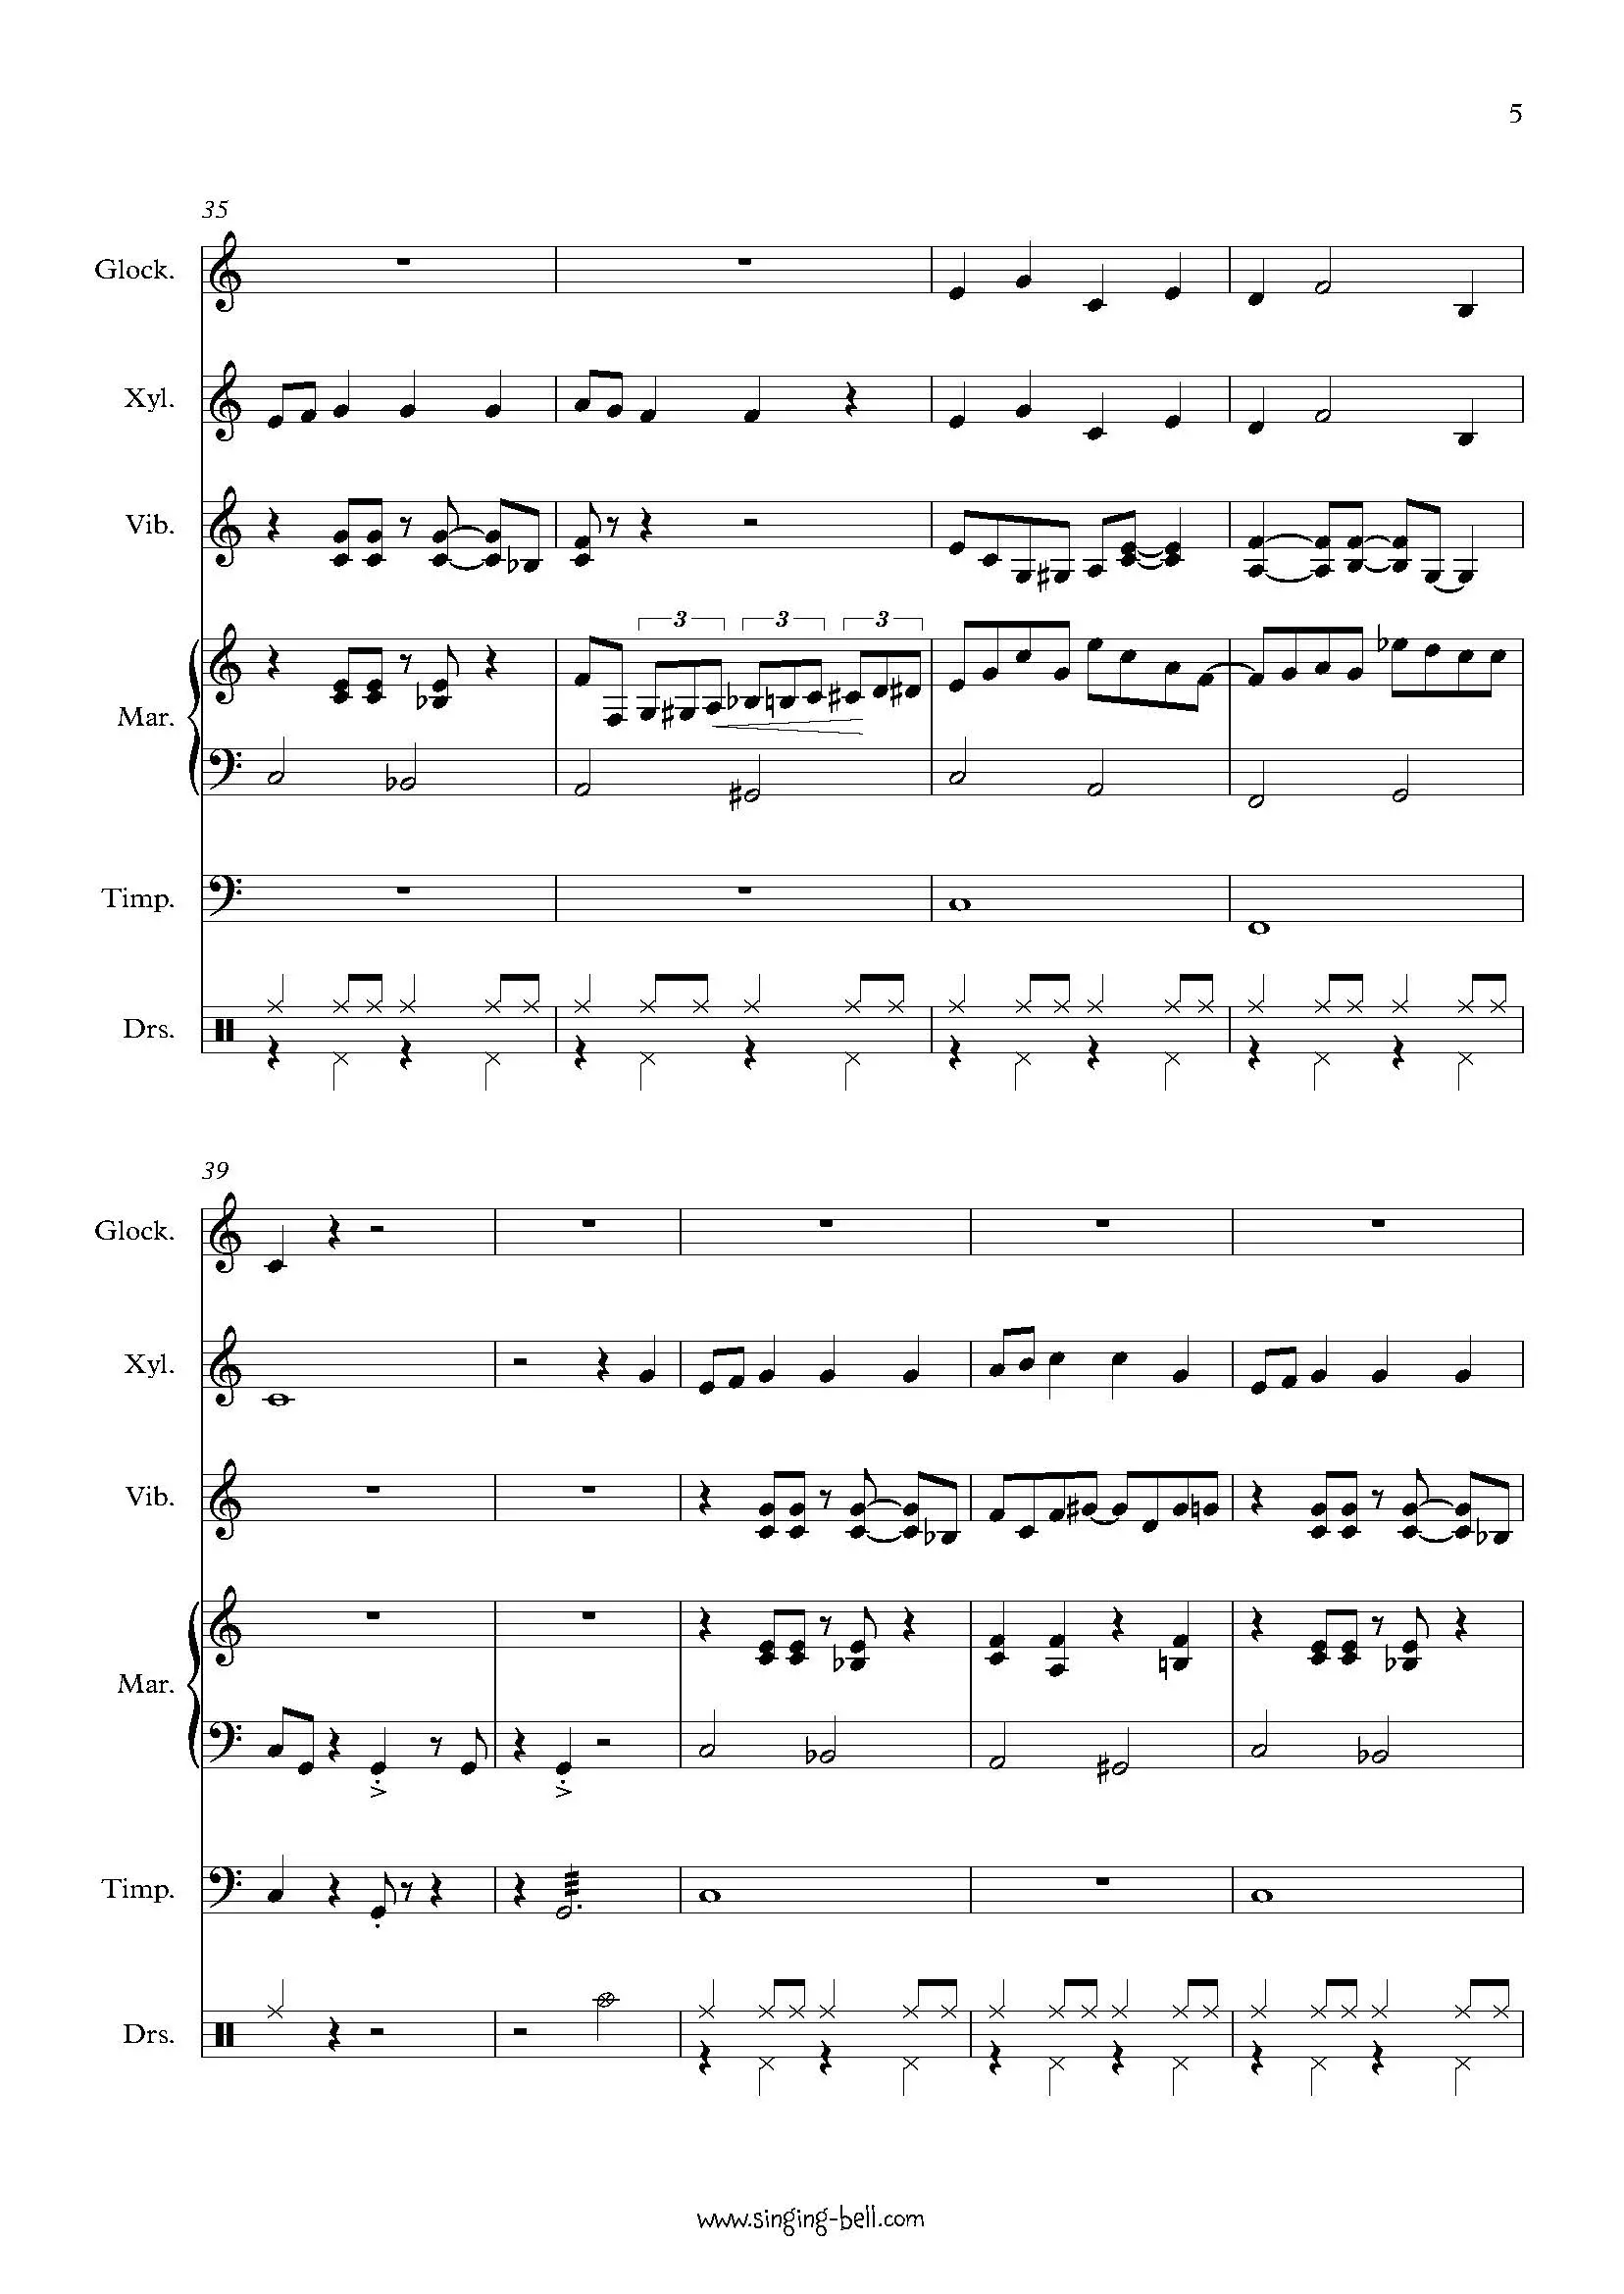 Santa Claus is Coming to Town - Percussion Sheet Music Page 5